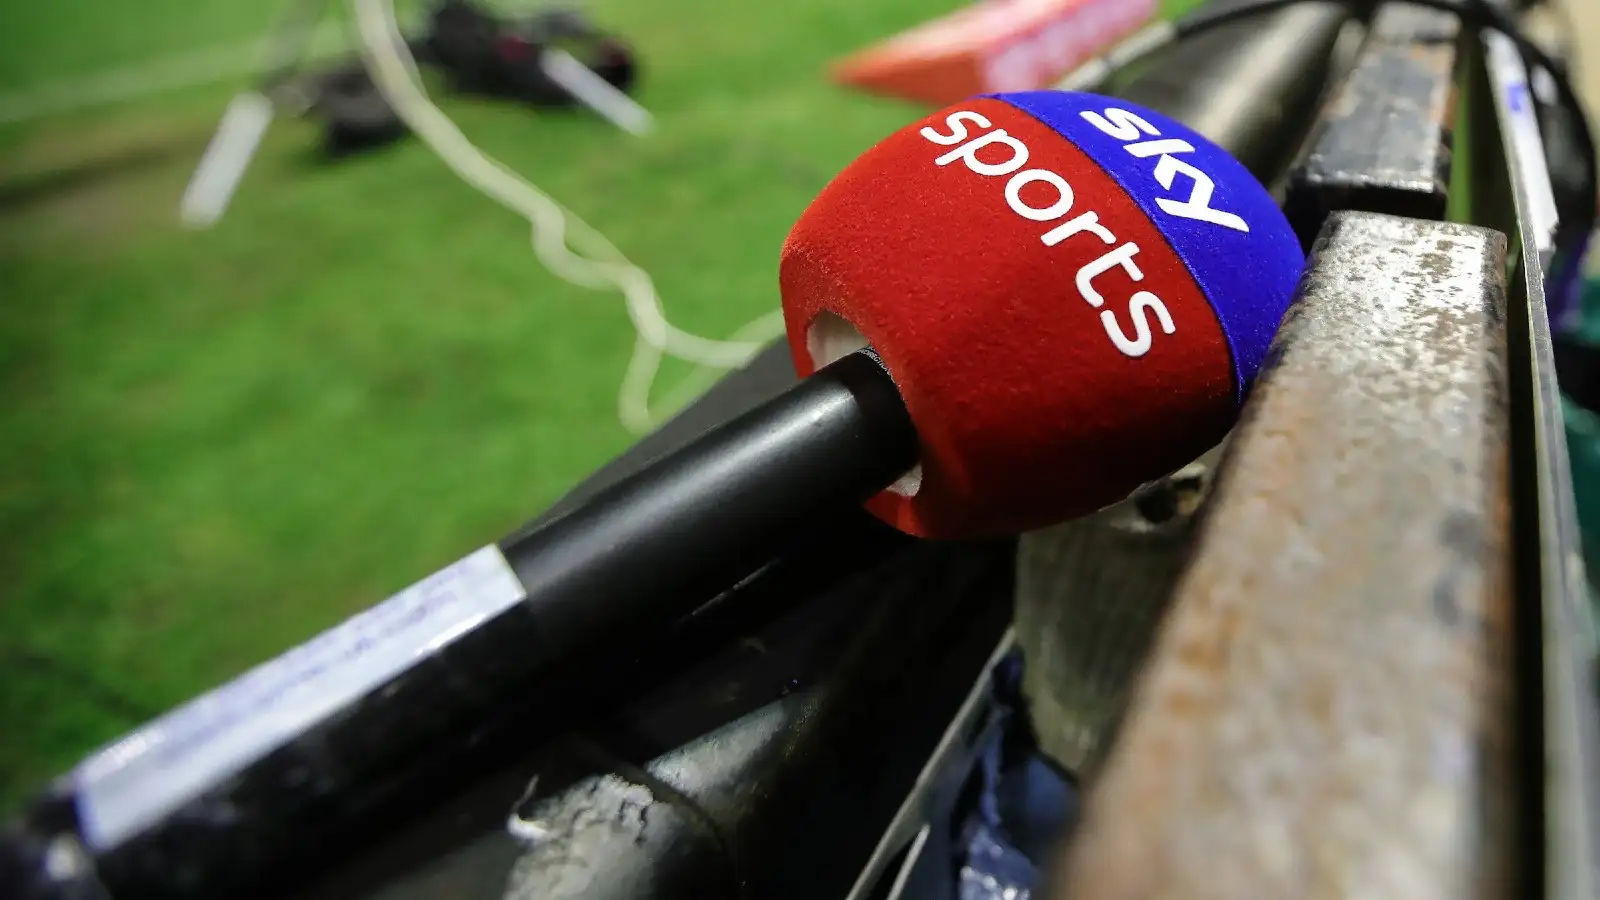 Sky Sports rugby league TV coverage